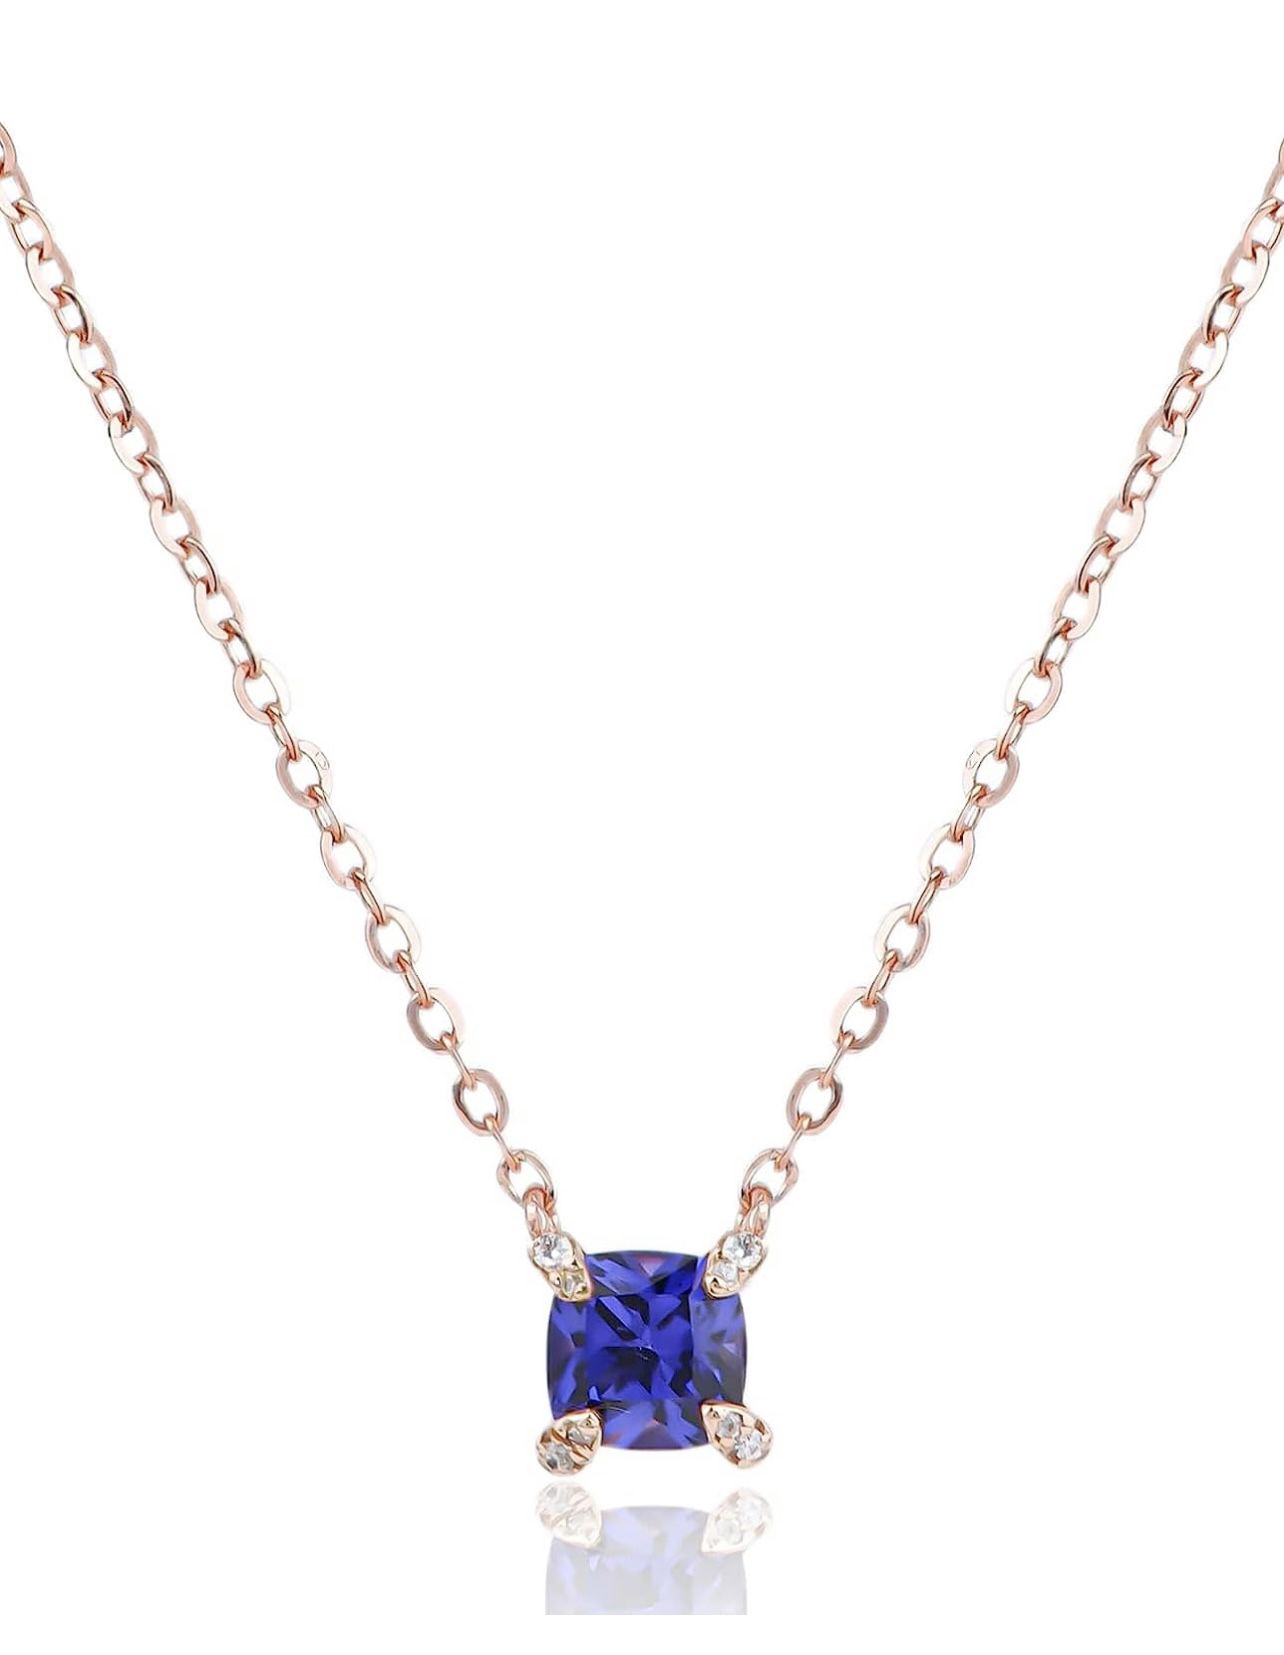 1 CT Cushion Cut Sapphire Birthstone Necklace, 925 Sterling Silver, 18+ 2 inch chain. 